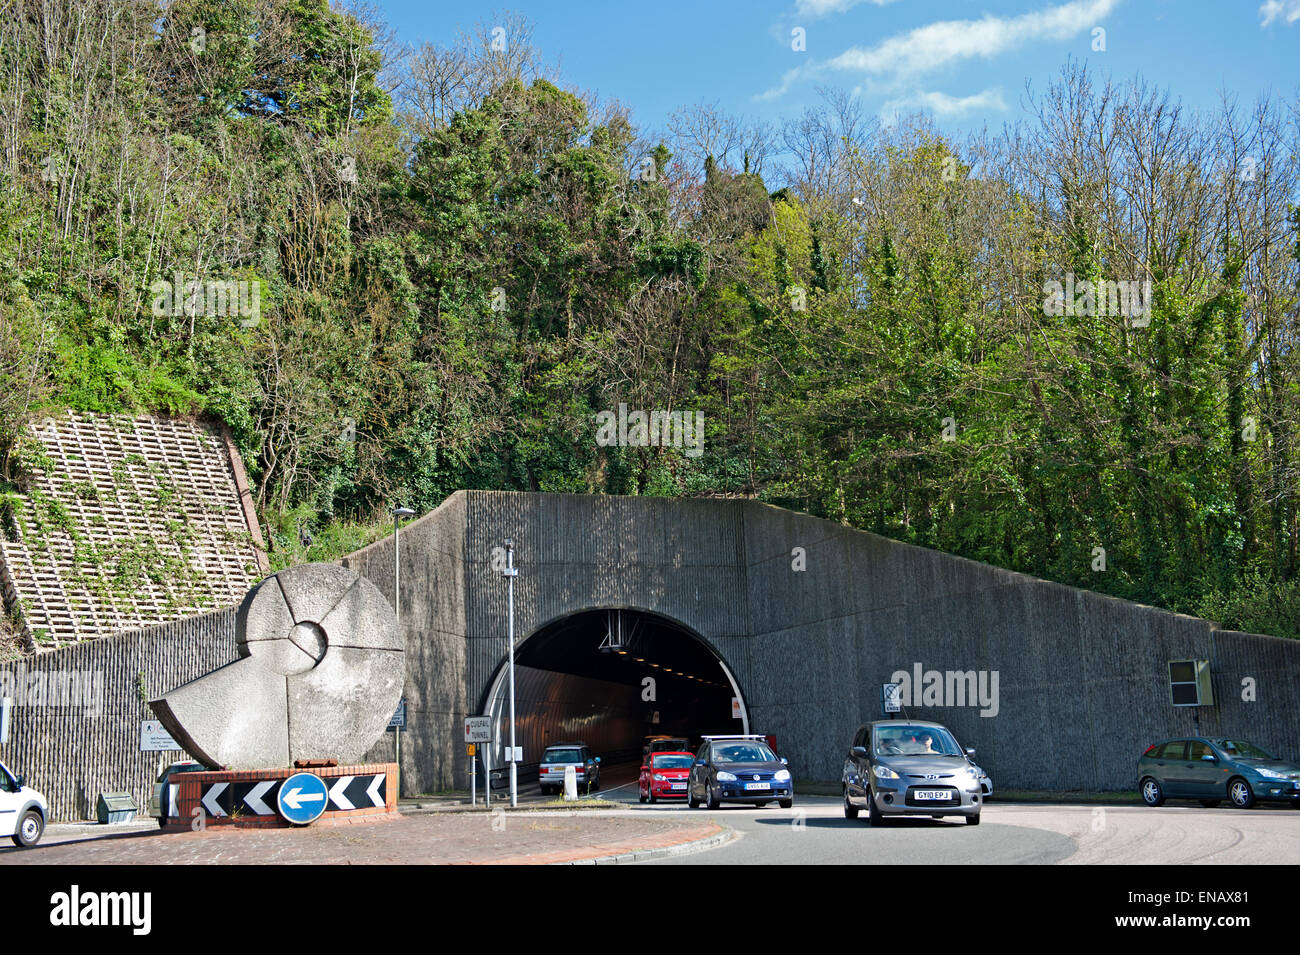 The Cuilfail Tunnel, Lewes. East Sussex, UK. The sculpture in the foreground is 'The Spiral' by Peter Randall-Page Stock Photo